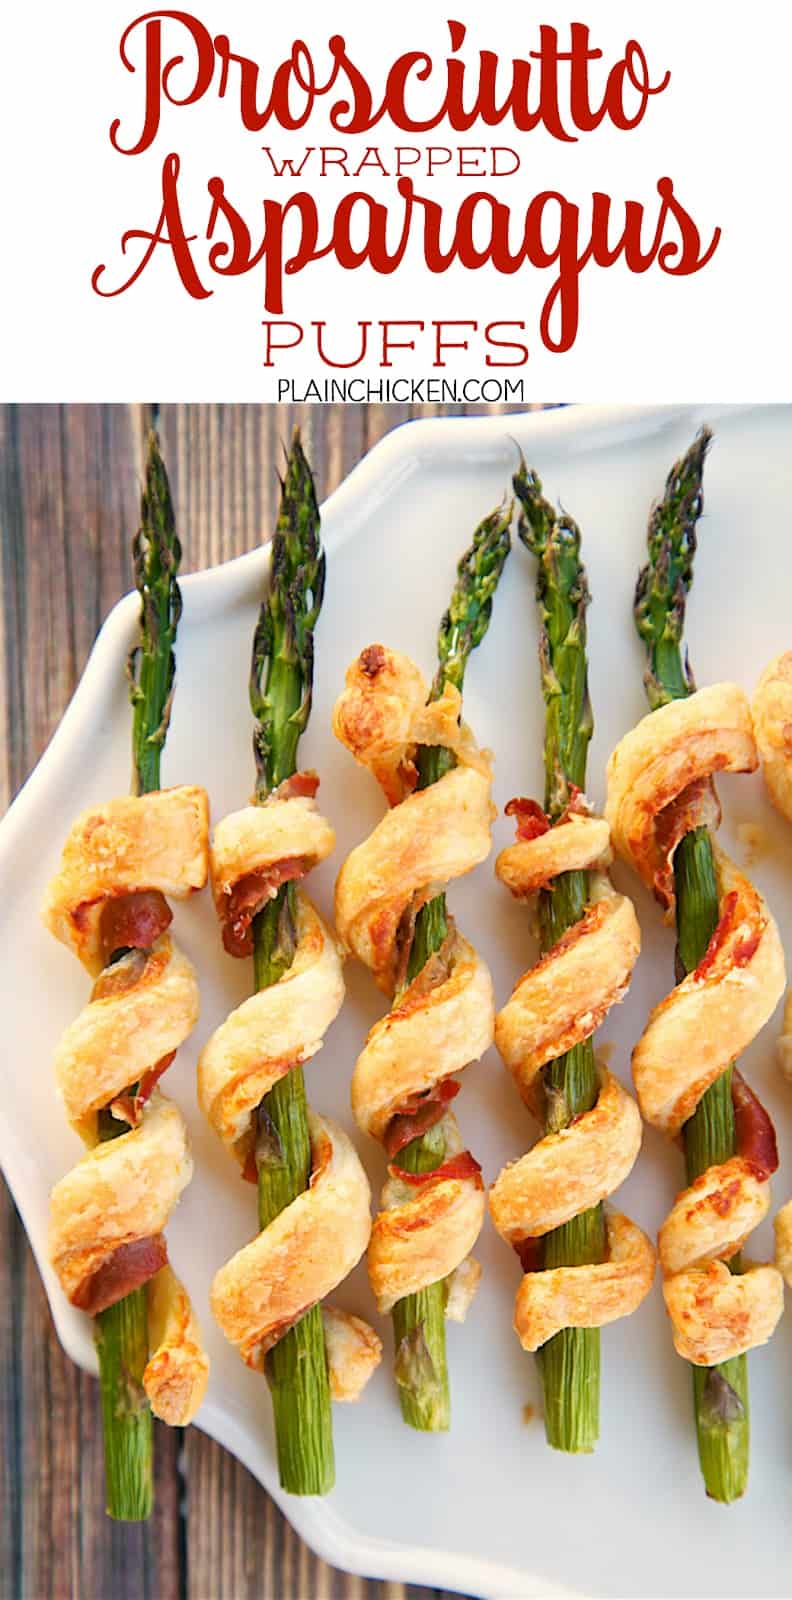 Prosciutto Wrapped Asparagus Puffs - only 5 ingredients! Asparagus, prosciutto, dijon mustard, parmesan cheese and puff pastry. Great side dish or appetizer. Can make ahead of time and freezer for later. You can't go wrong with this recipe! SO easy and delicious!!